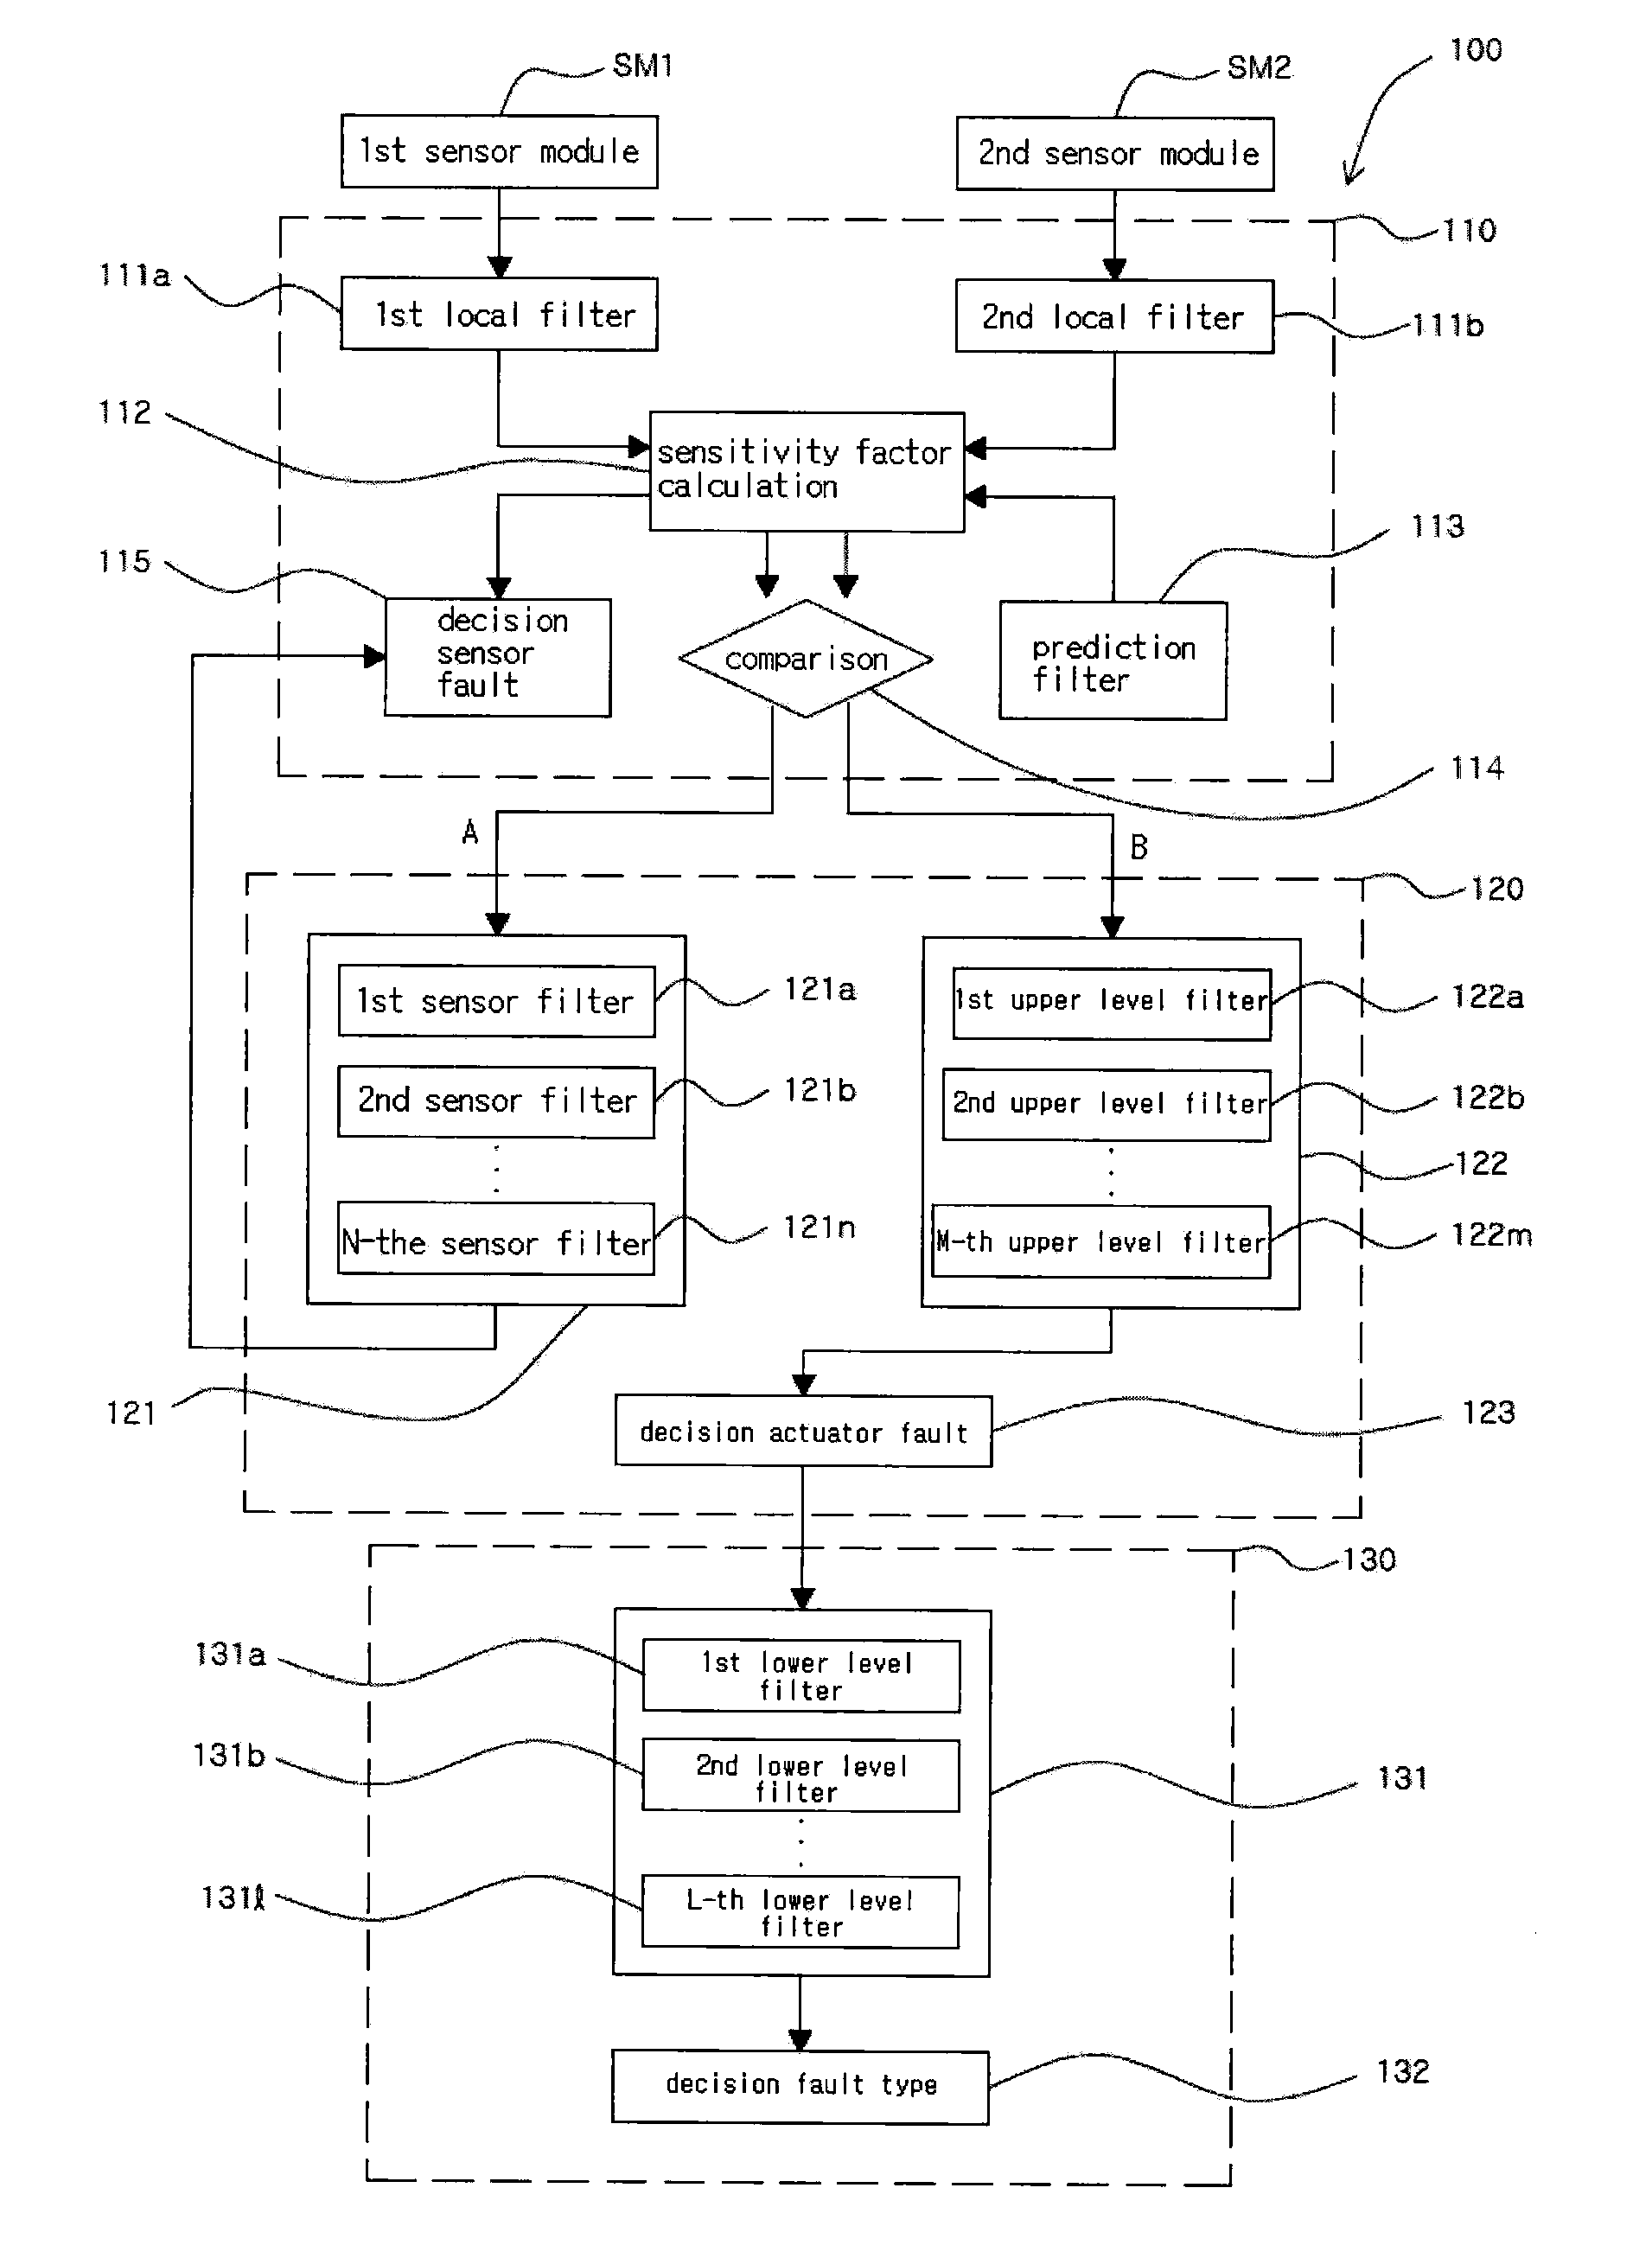 Fault Detector and Fault Detection Method for Attitude Control System of Spacecraft